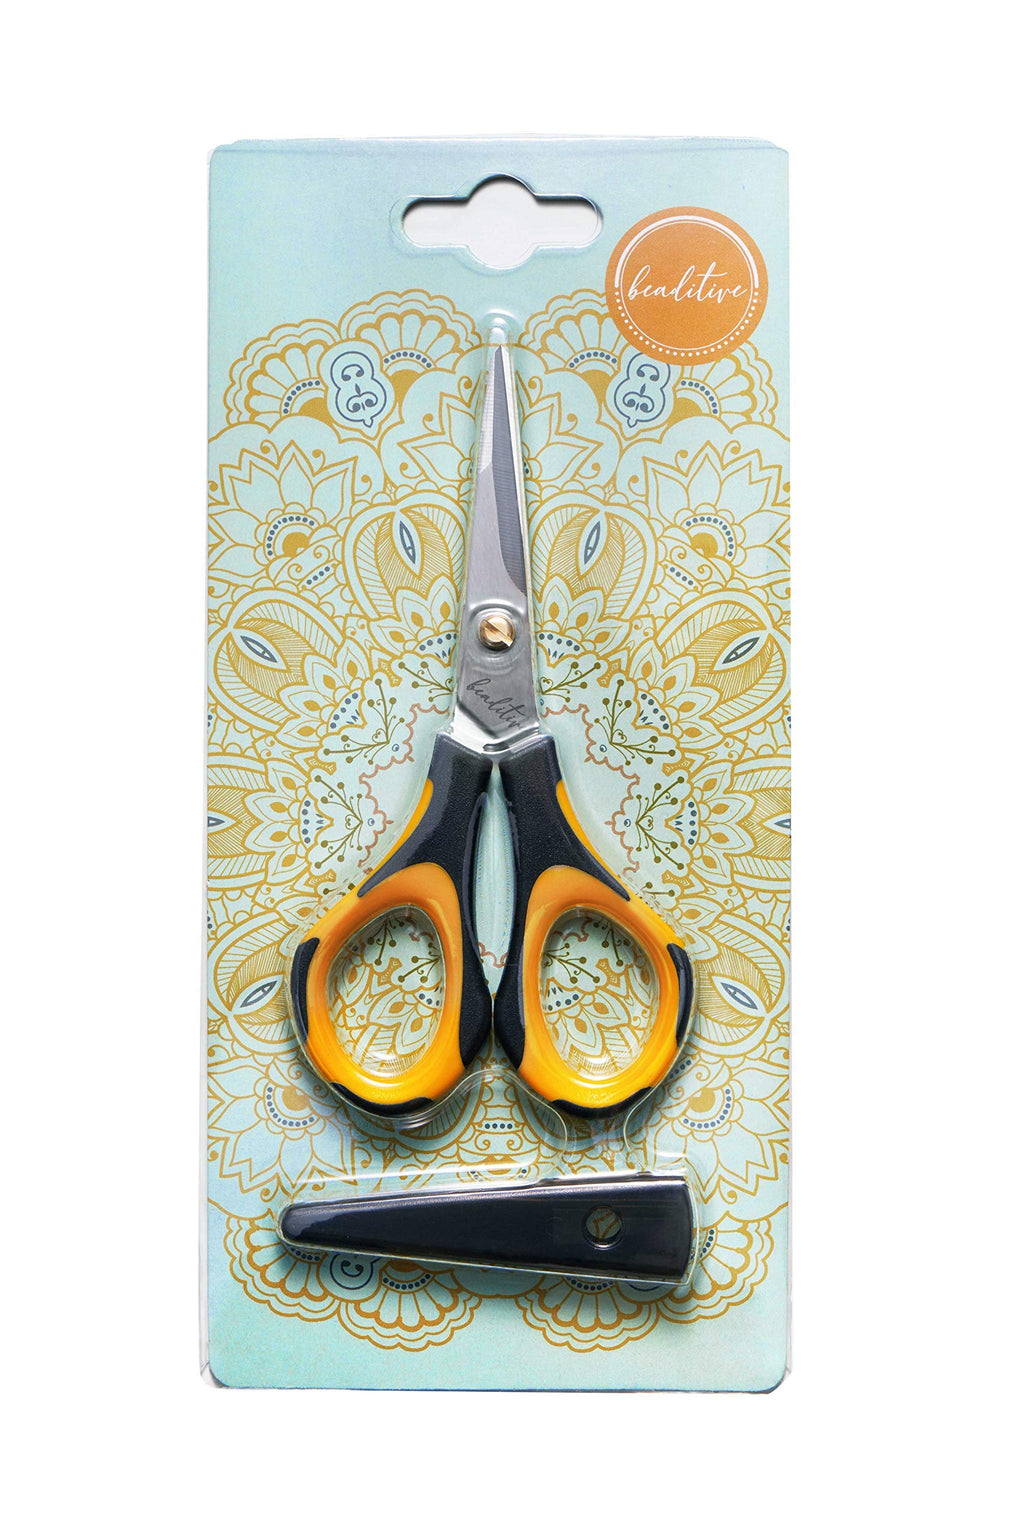  [AUSTRALIA] - Beaditive Precision Craft Scissors - Stainless Steel Paper Crafting Scissors With Safety Cap - Ultra Sharp Blades & Non-Slip TPR Handles - Adult & Kid Scrapbooking Scissors For Home, Office, School